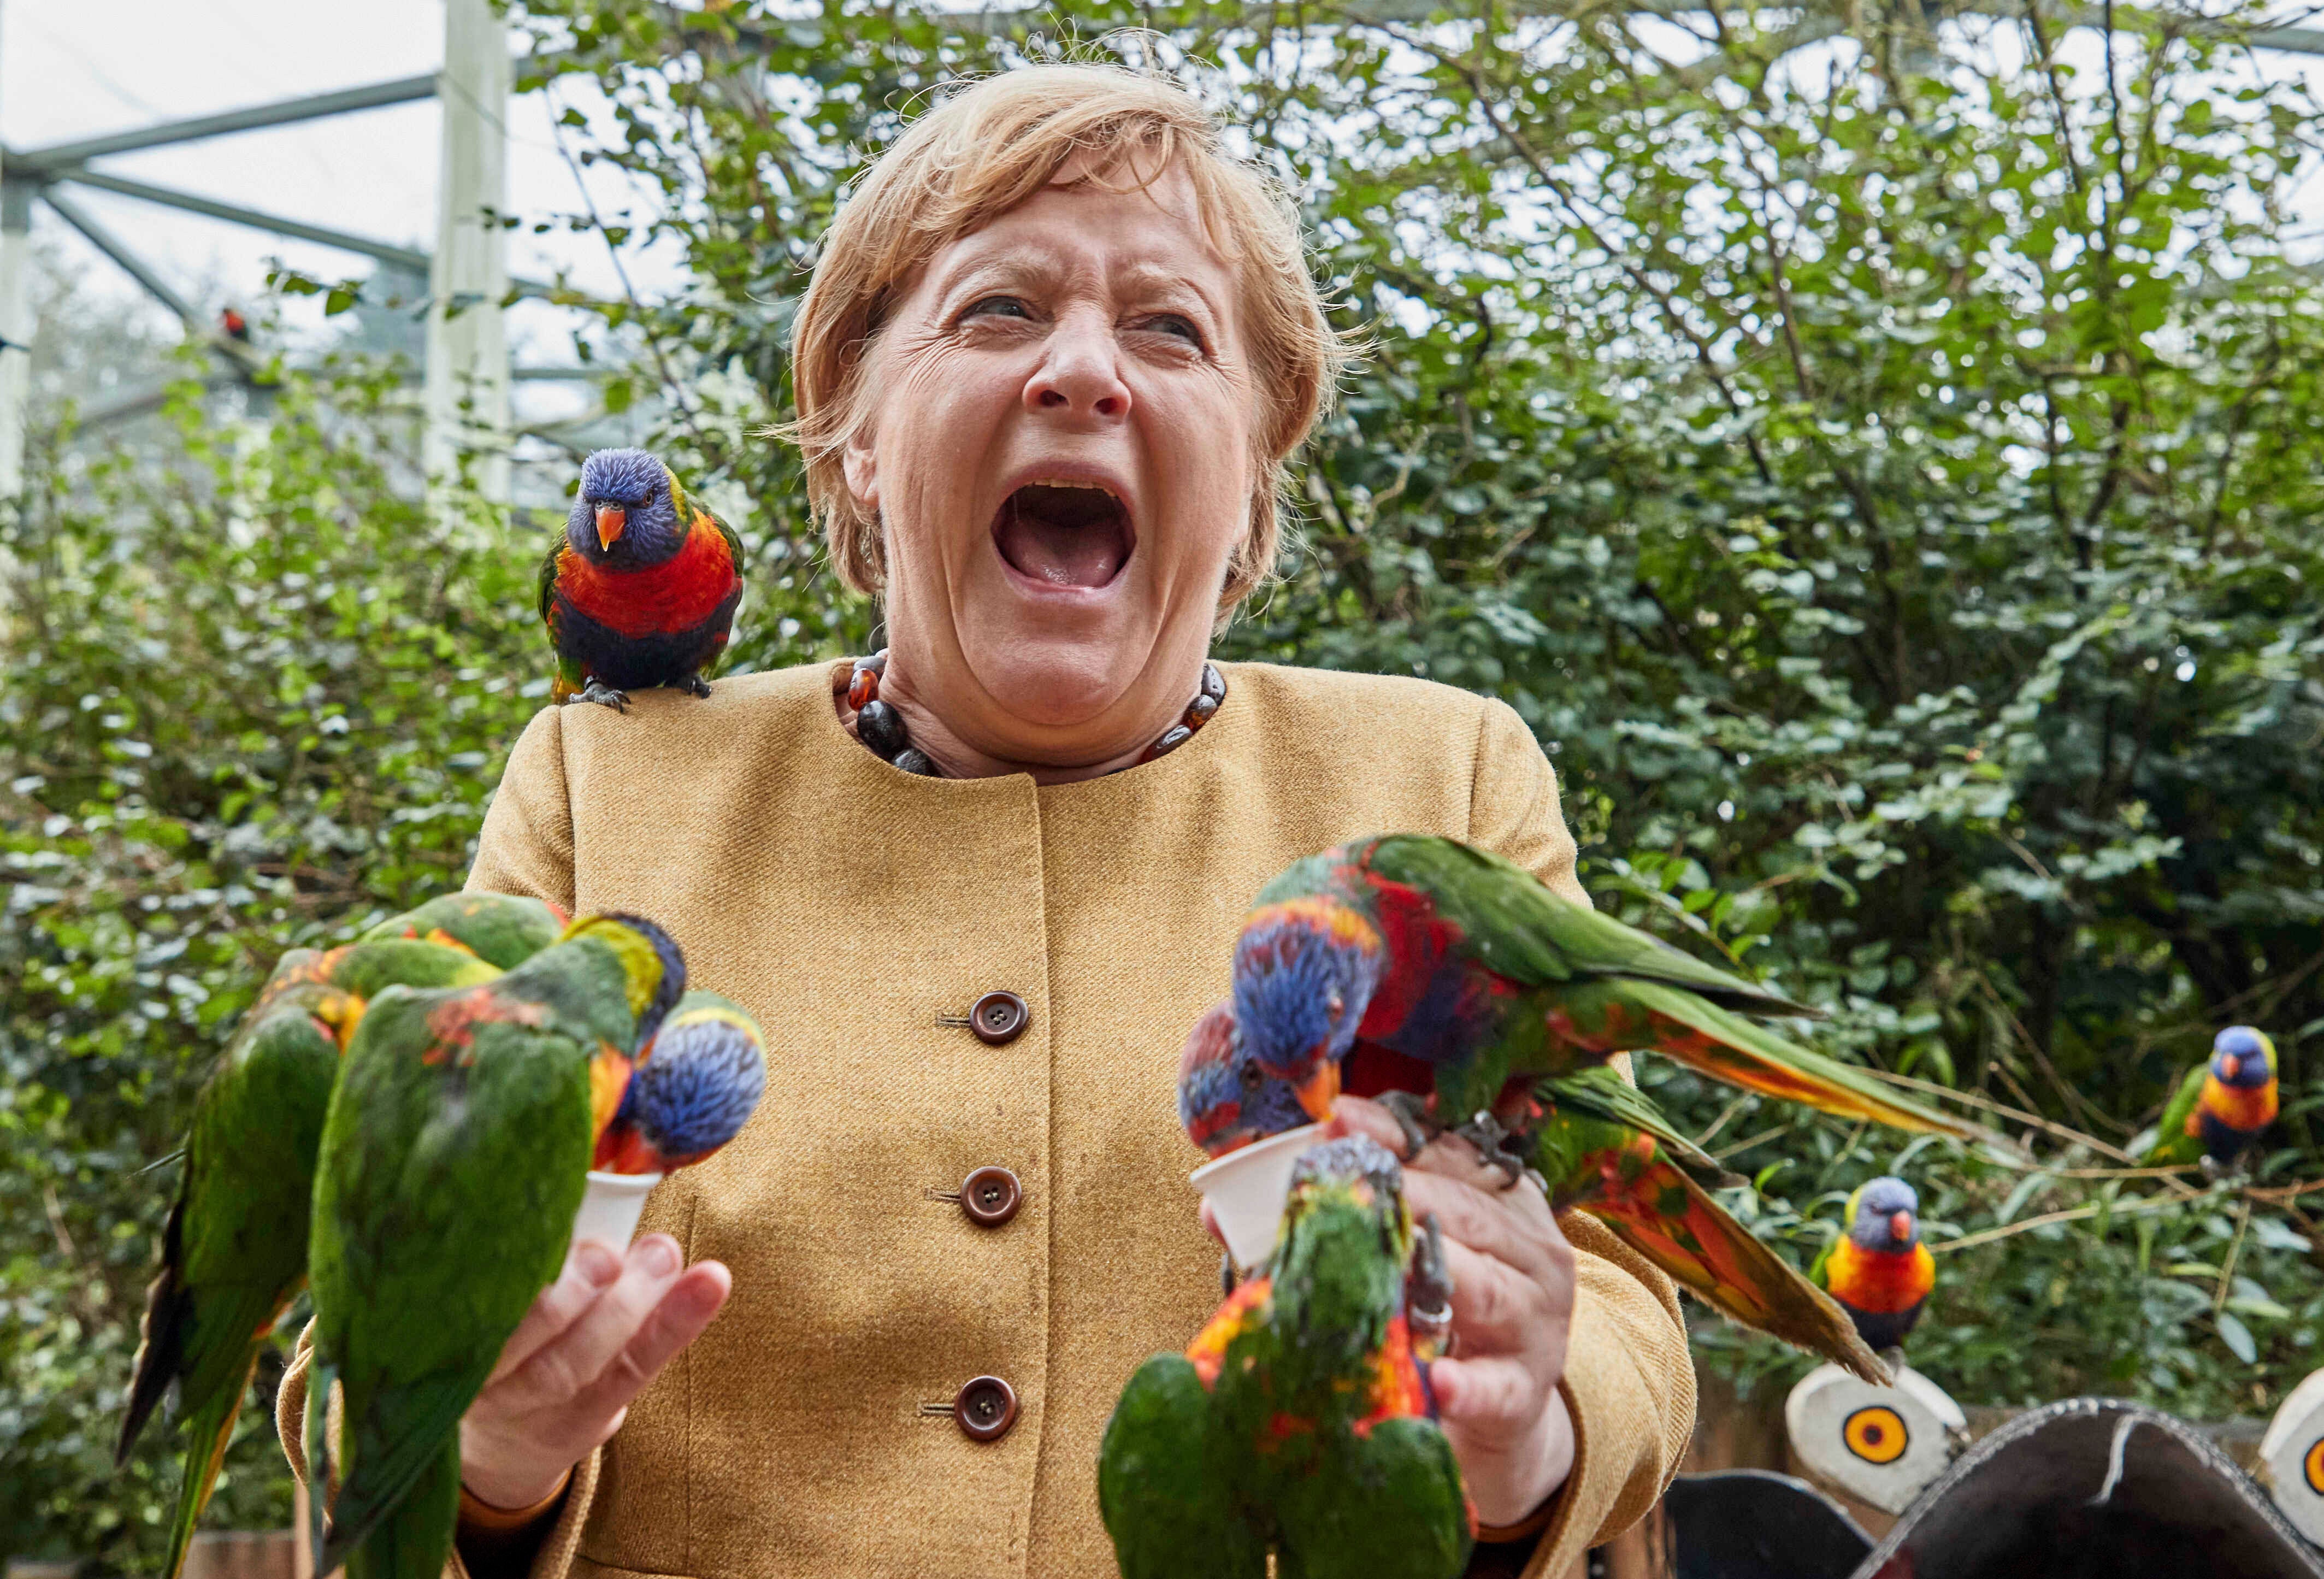 Angela Merkel can soon enjoy life out of the spotlight. She is pictured here visiting a bird park in Germany on Wednesday.